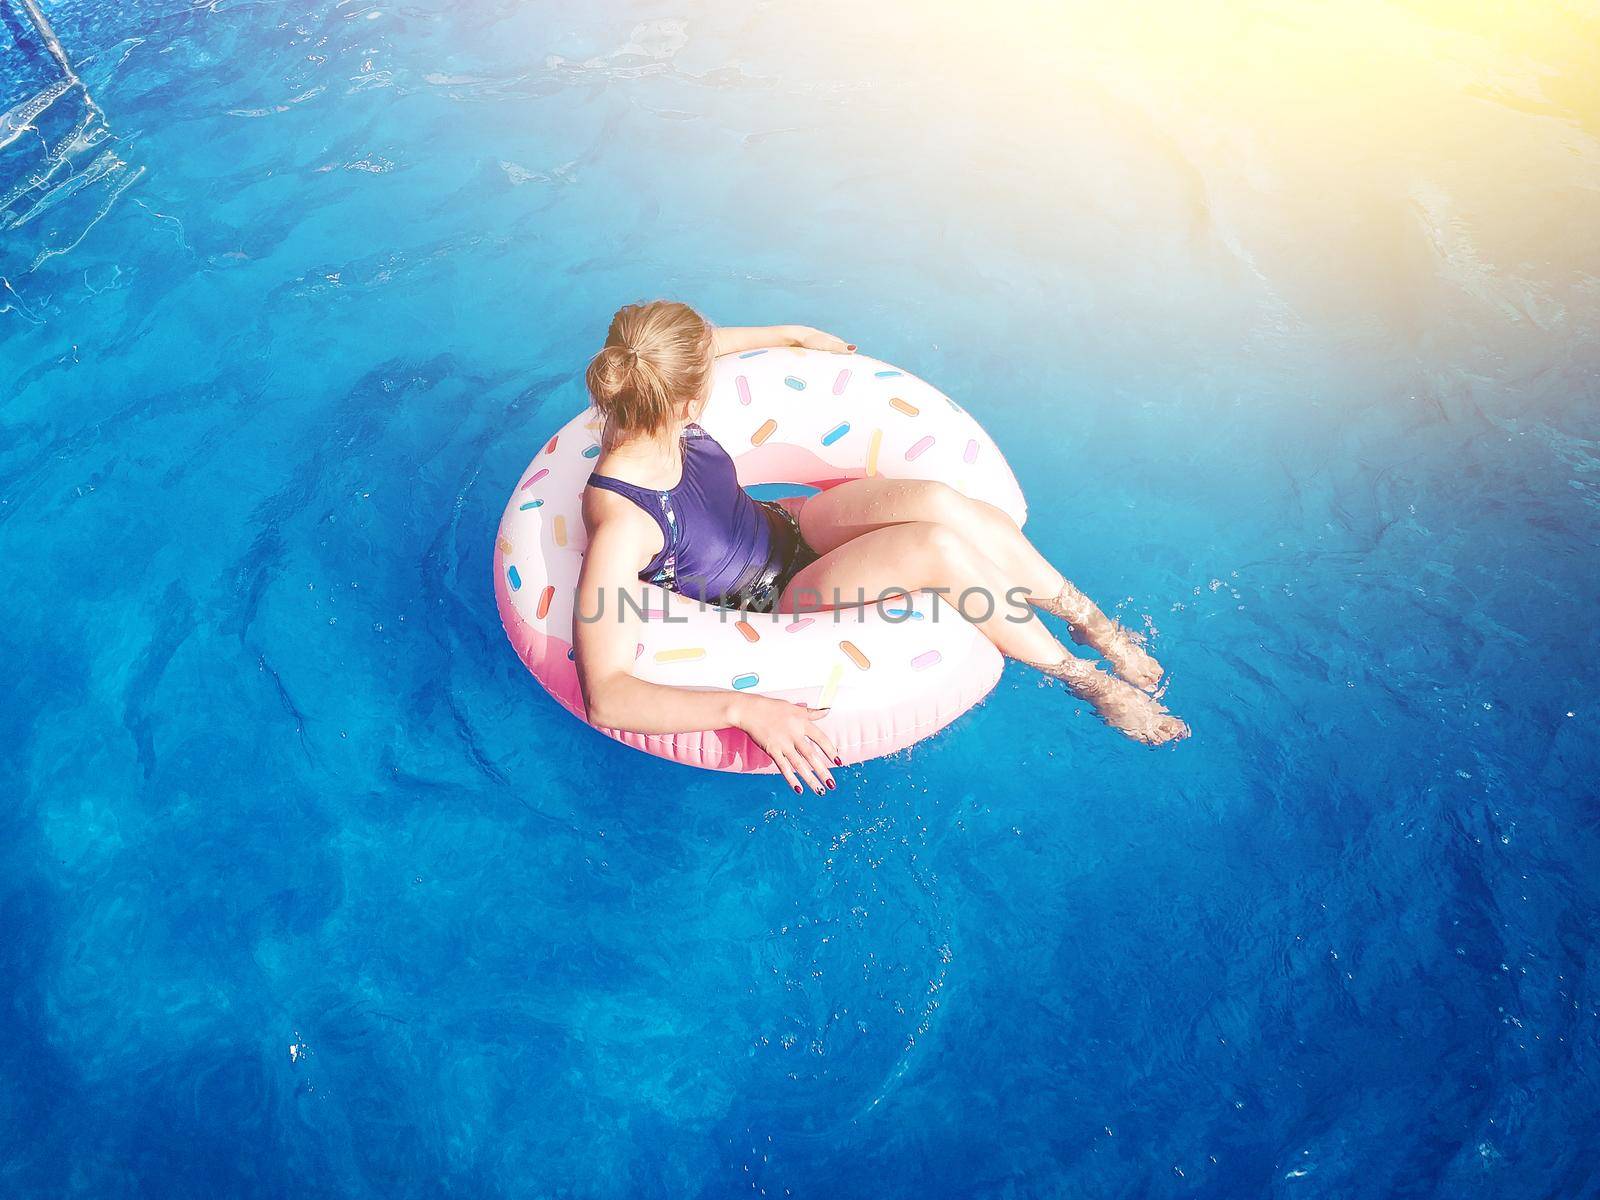 Summer warm vacation.The girl sits on a rubber ring in the form of donut in blue pool in the sun.Time to relax on an air mattress. Having fun in the water for a family vacation.Sea resort.Copy space. by Alla_Morozova93